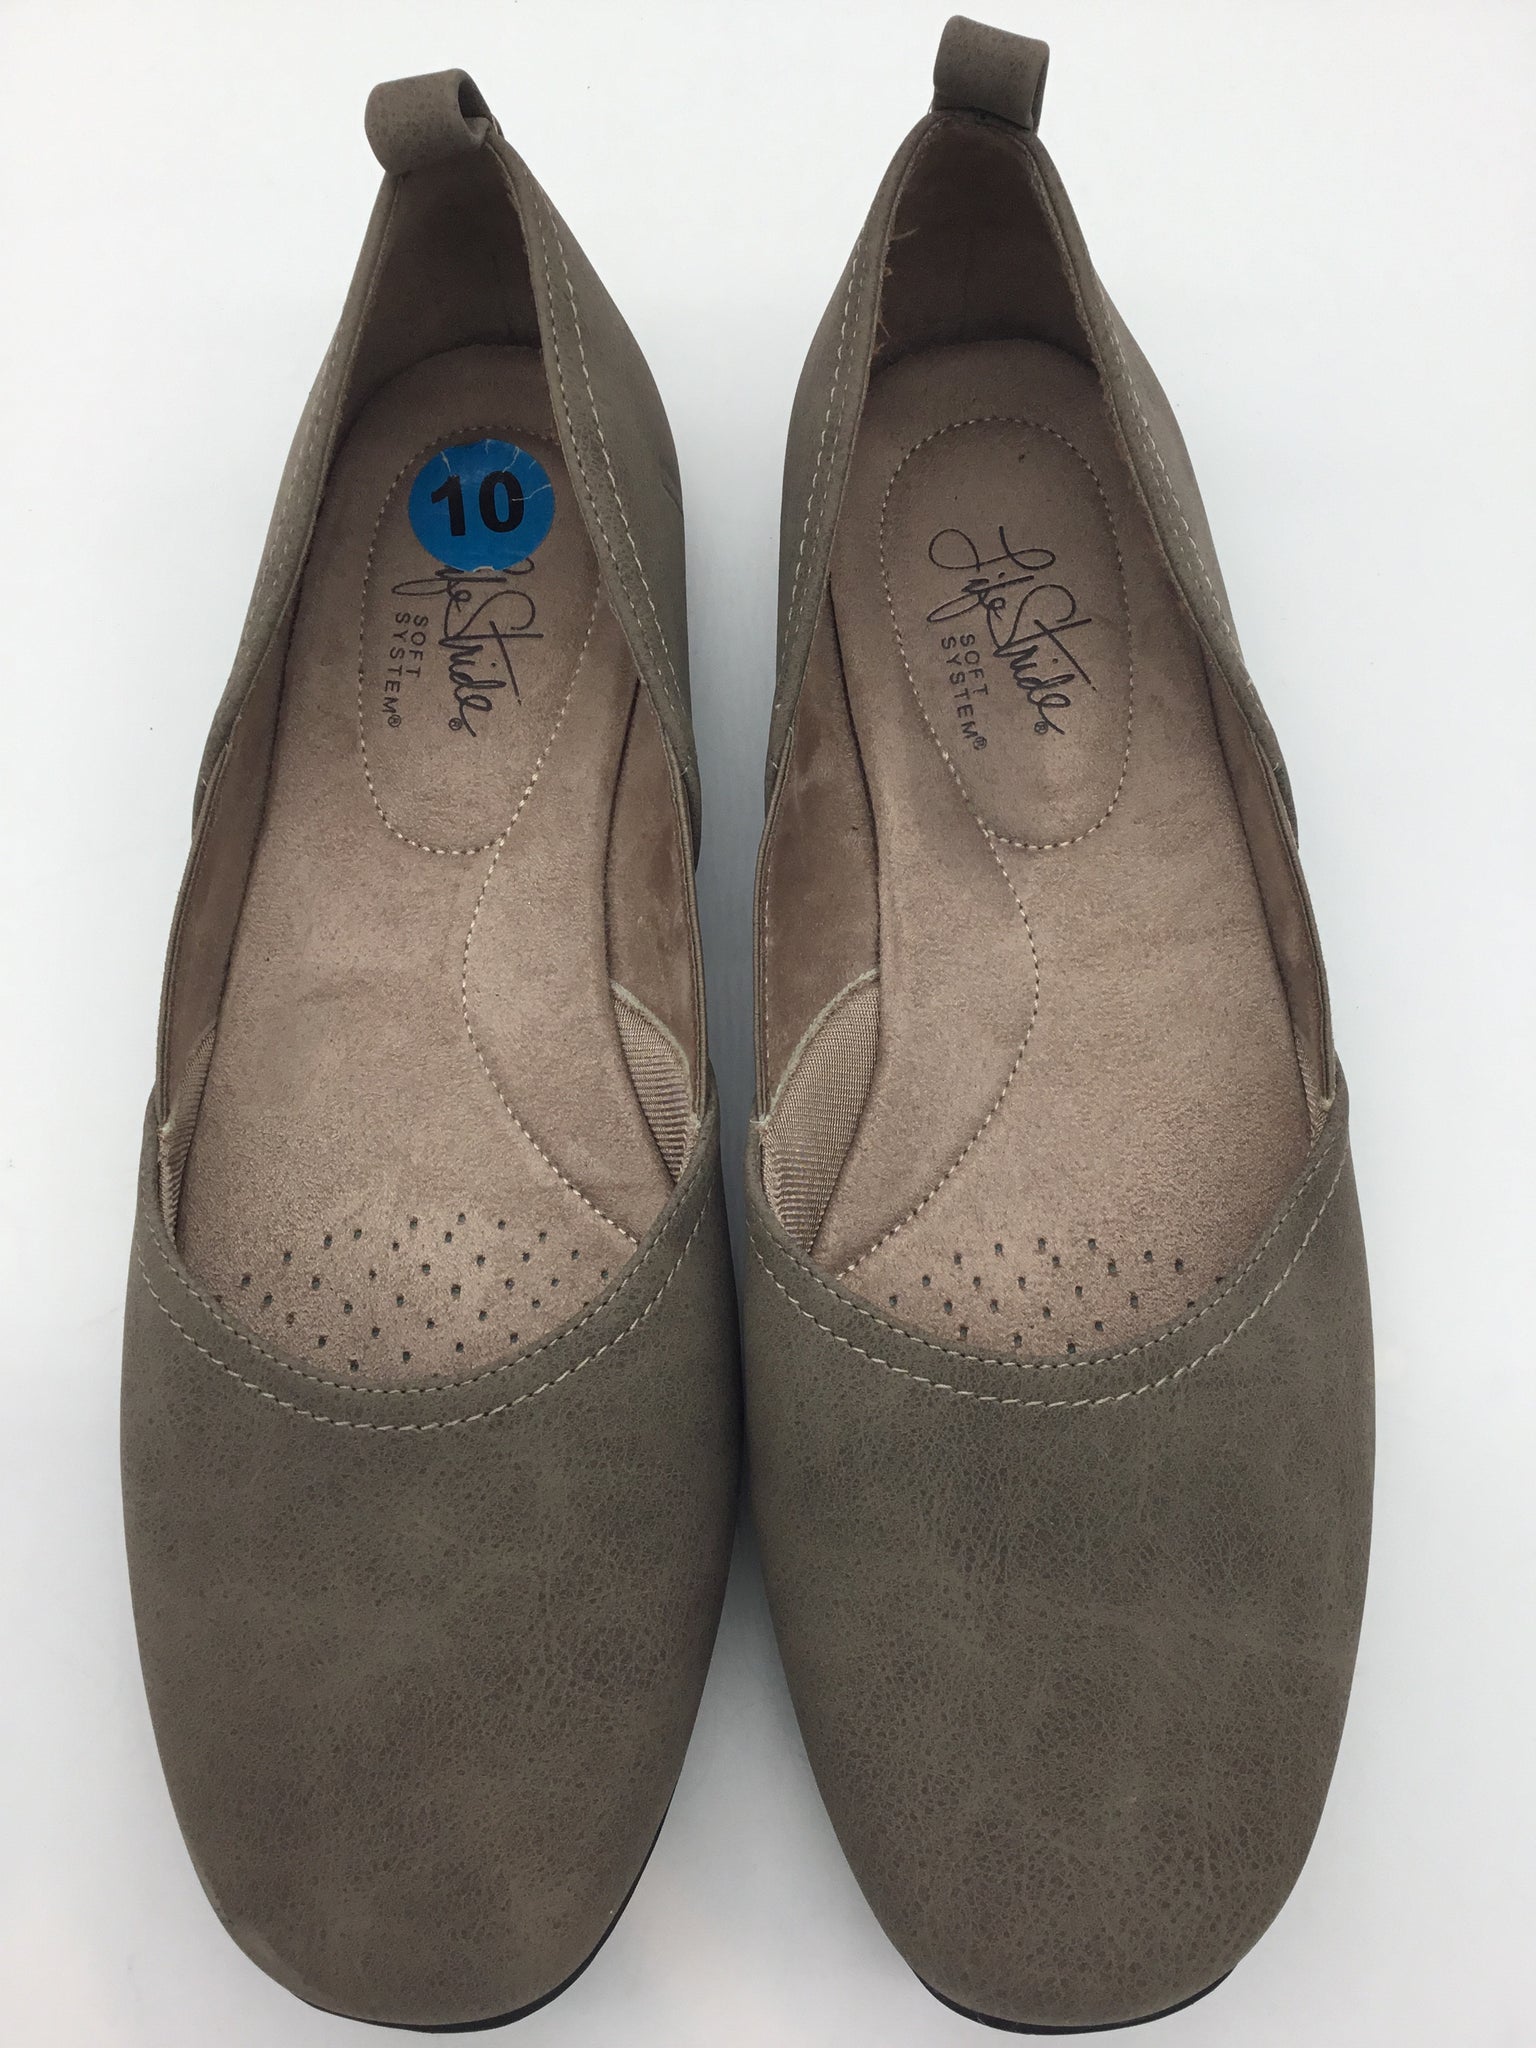 Life Stride Size 10 Taupe Shoes